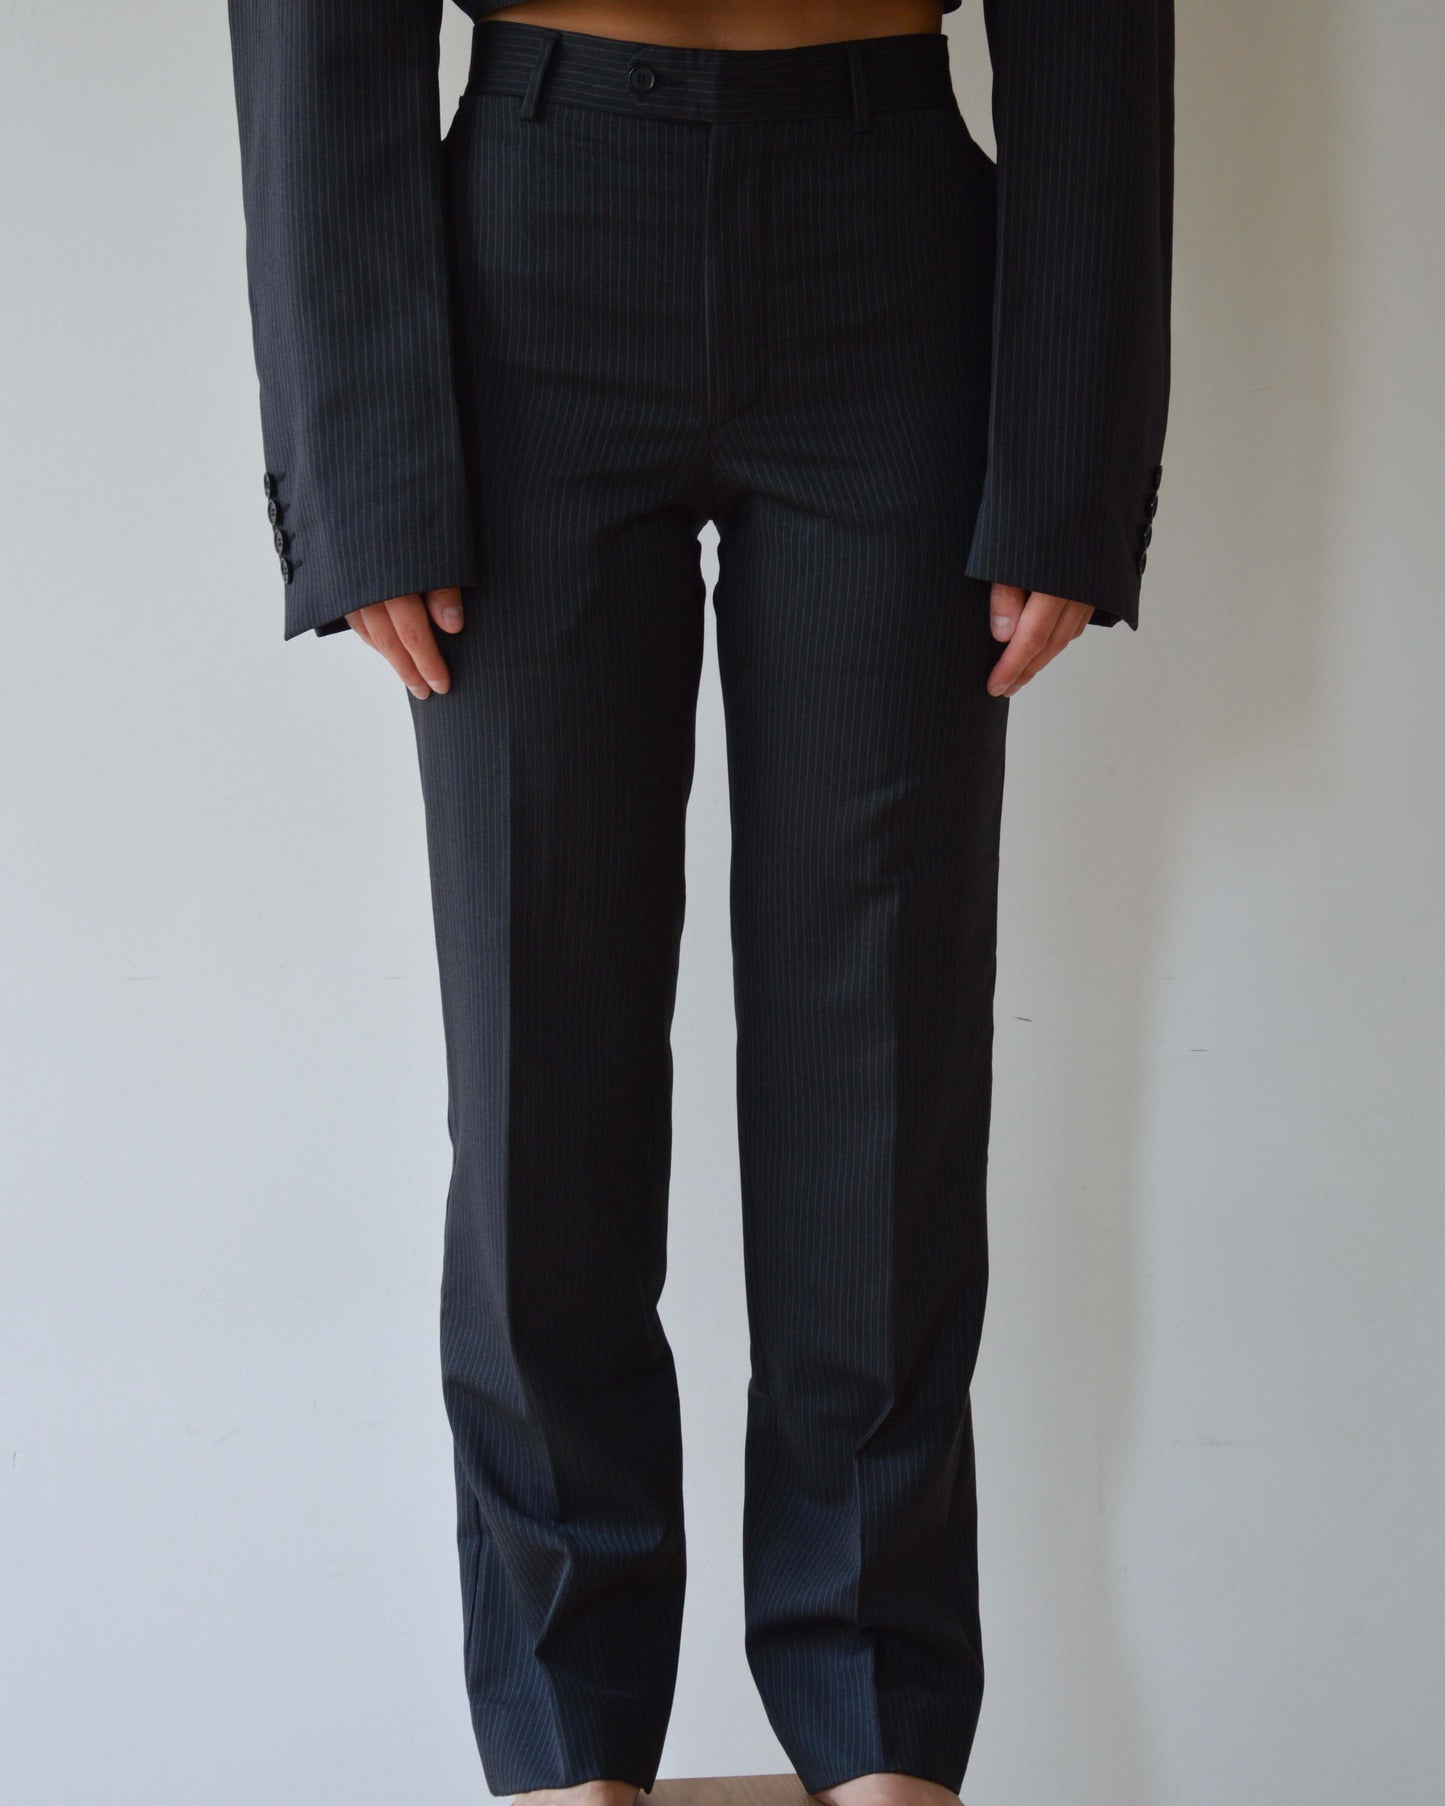 Blaset with trousers - Classic Black (XS/S)